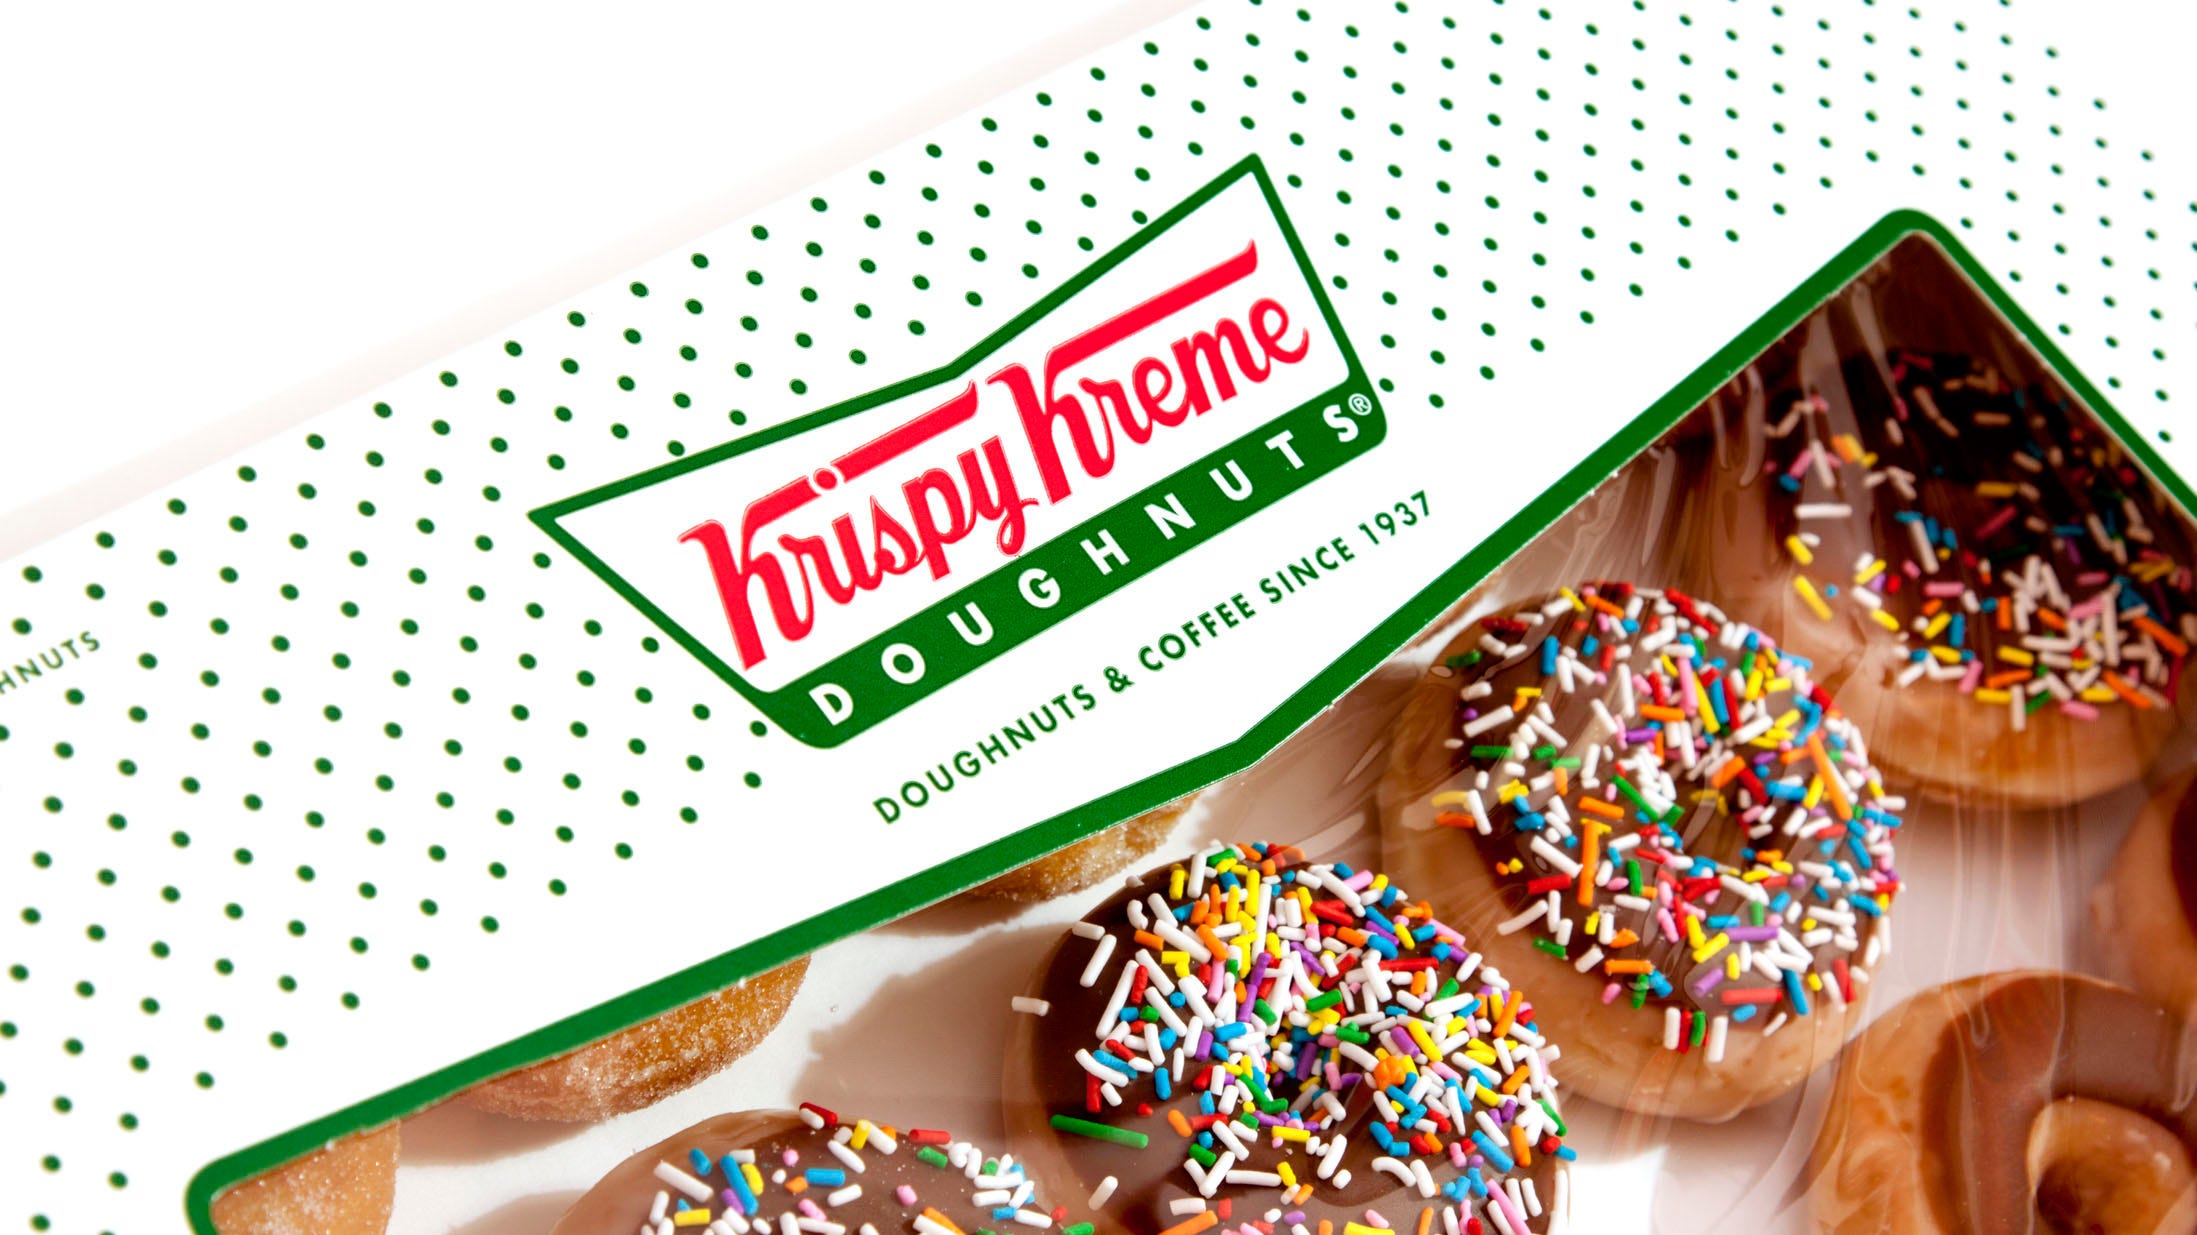 Krispy Kreme defends its free doughnuts to vaccinated people offer